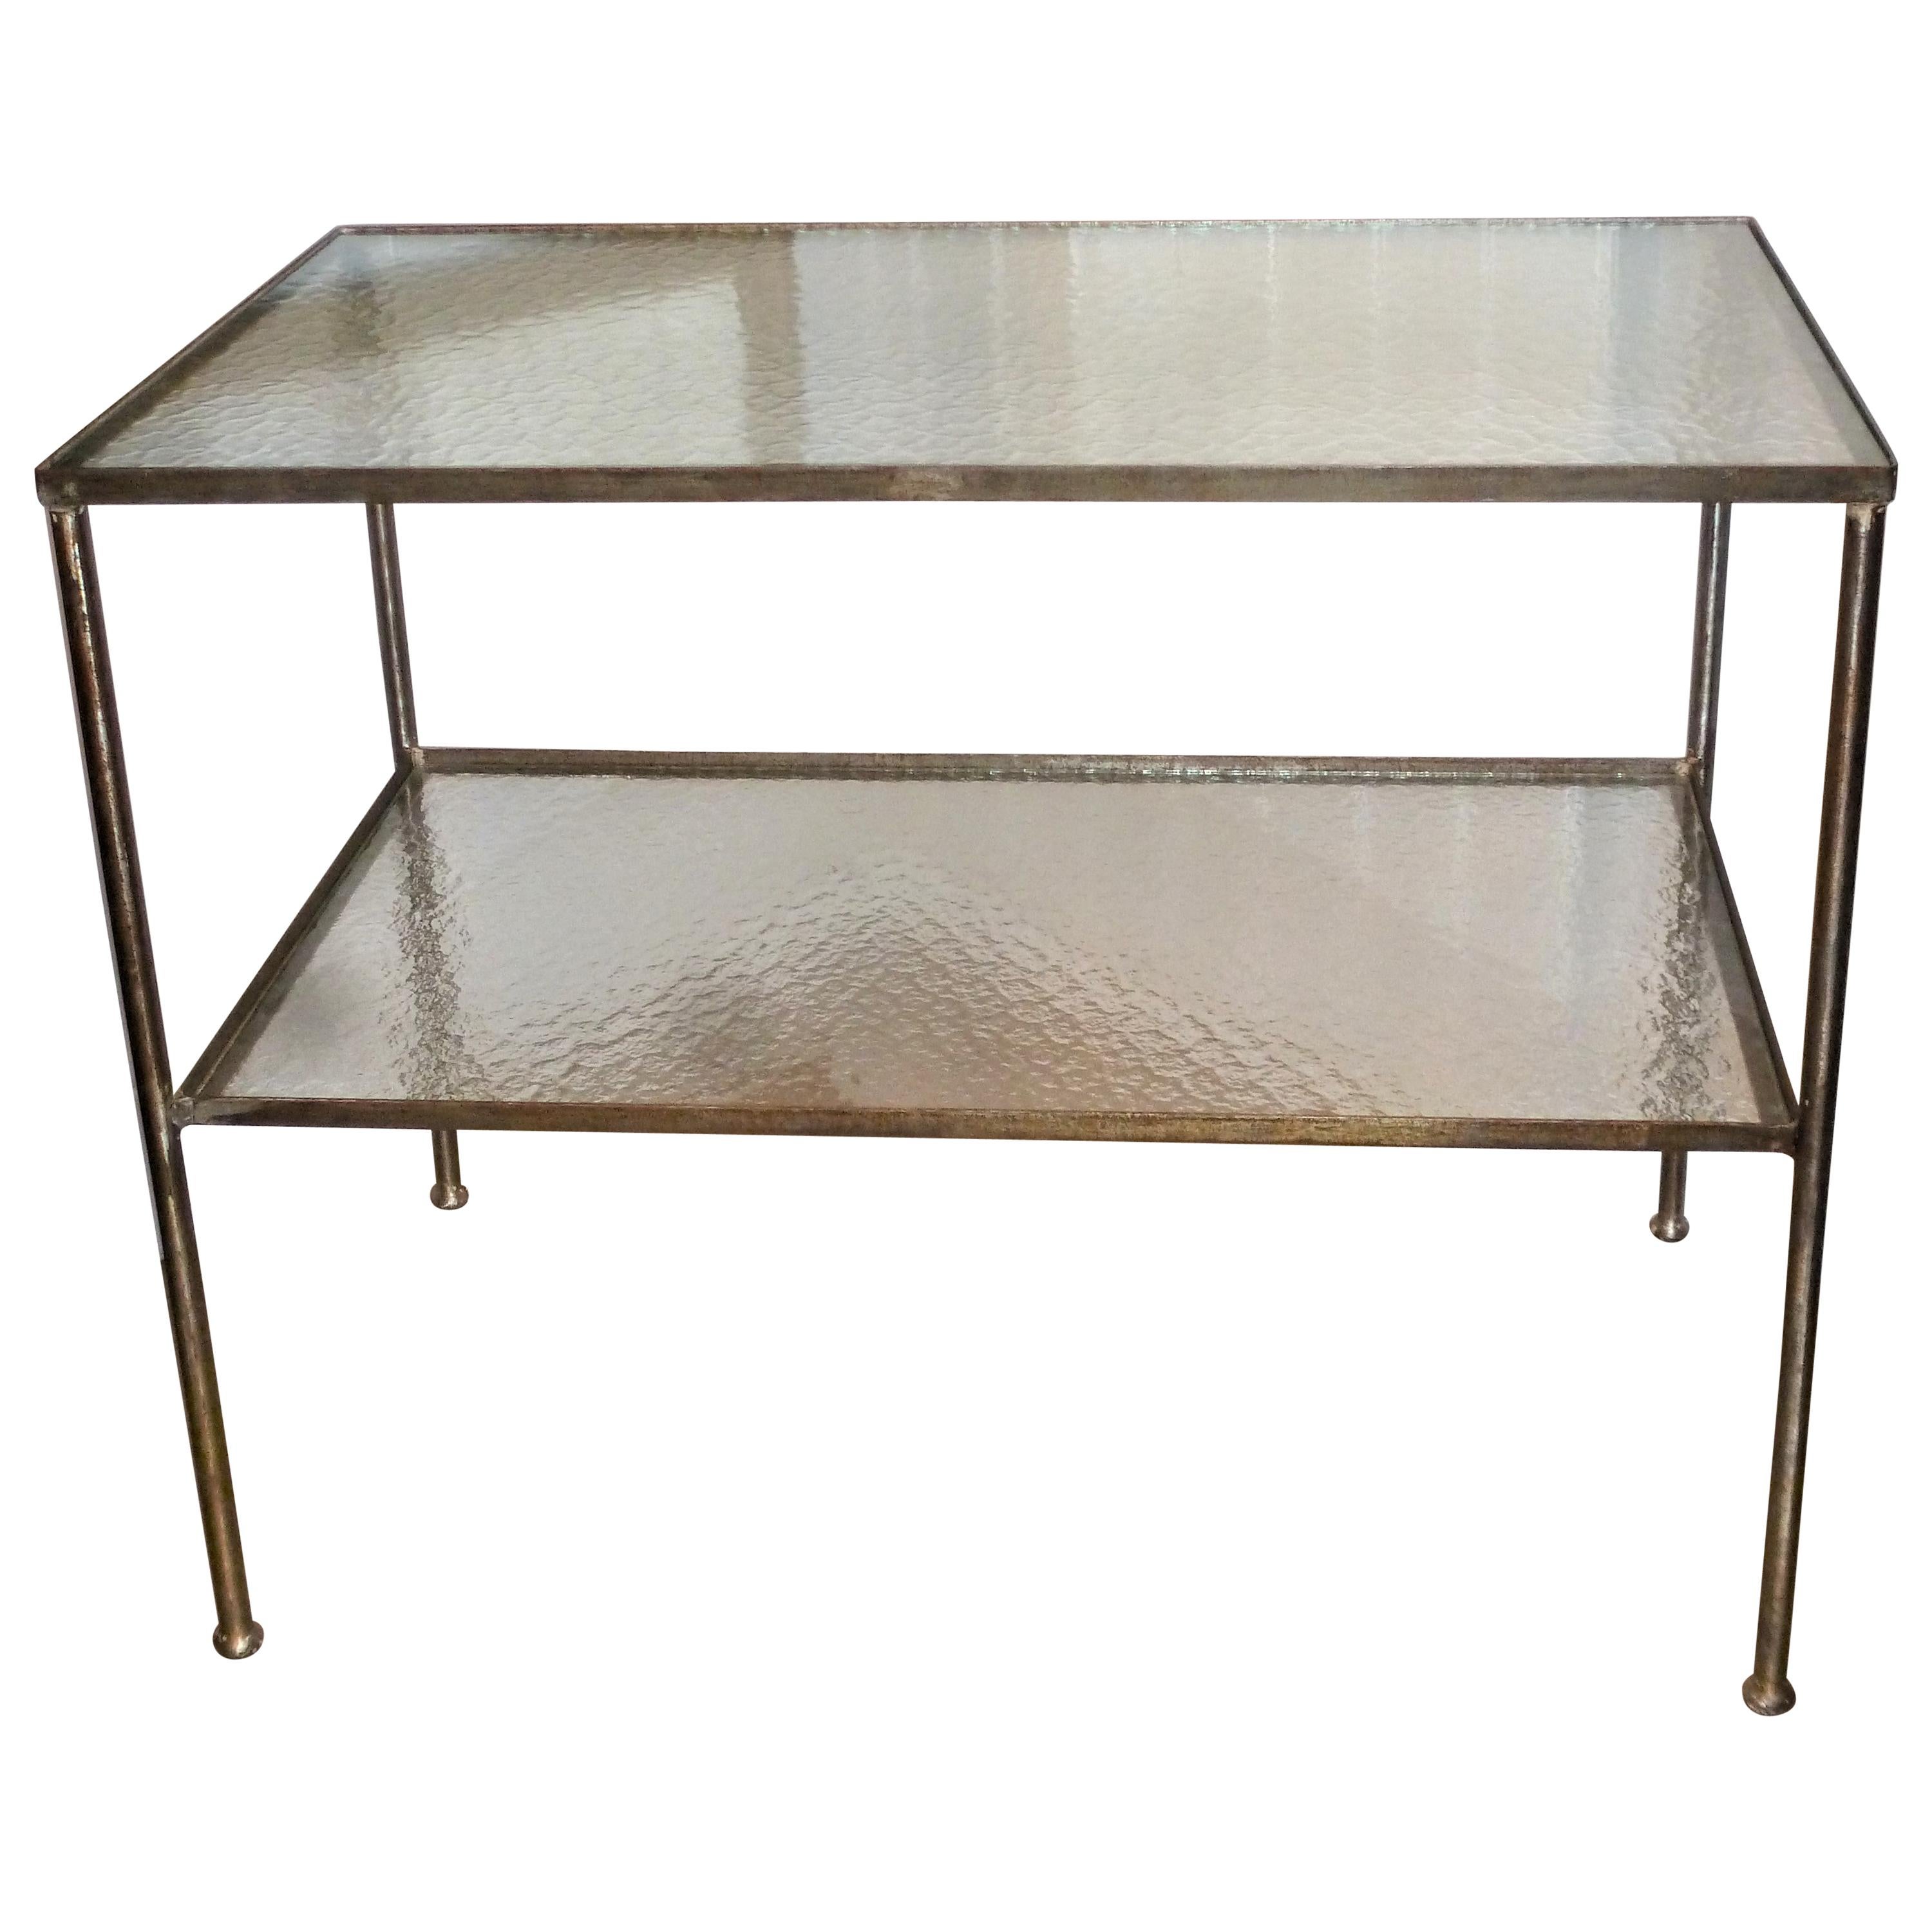 Antique Art Deco 1930s French Continental Metal Structure Glass Console Table For Sale